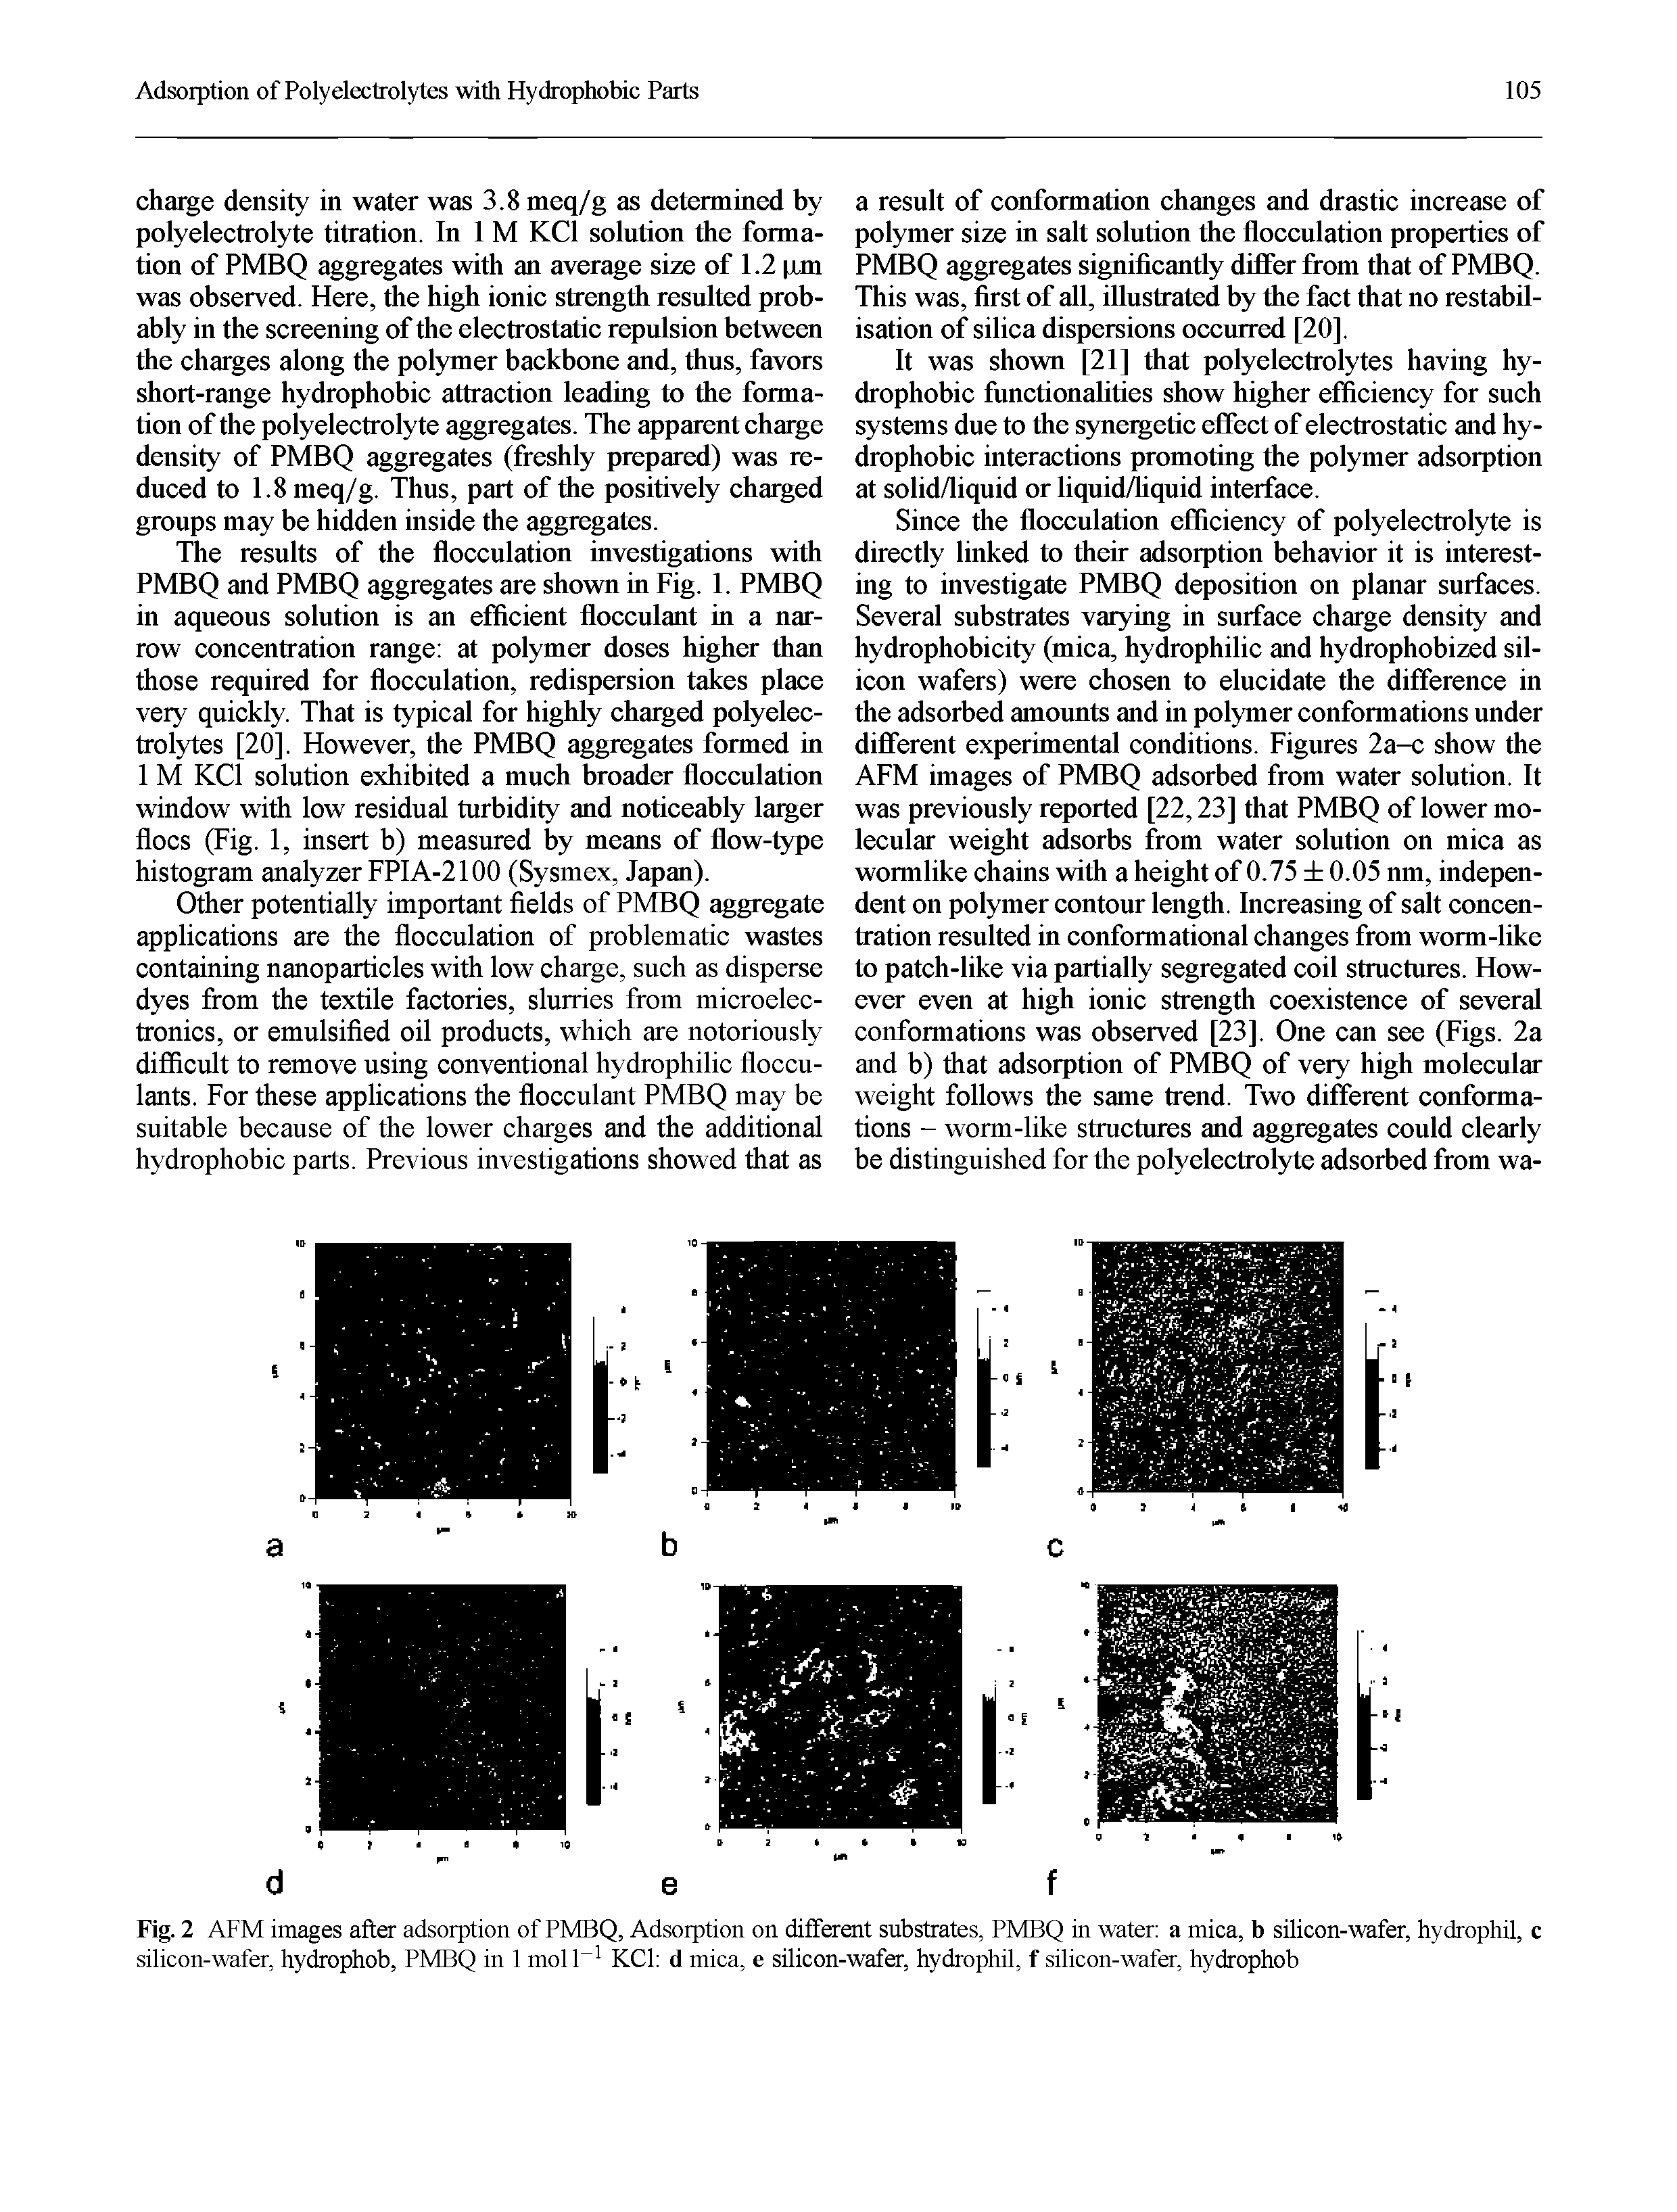 Fig. 2 AFM images after adsorption of PMBQ, Adsorption on different substrates, PMBQ in water a mica, b silicon-wafer, hydrophil, c silicon-wafer, hydrophob, PMBQ in 1 molff1 KC1 d mica, e silicon-wafer, hydrophil, f silicon-wafer, hydrophob...